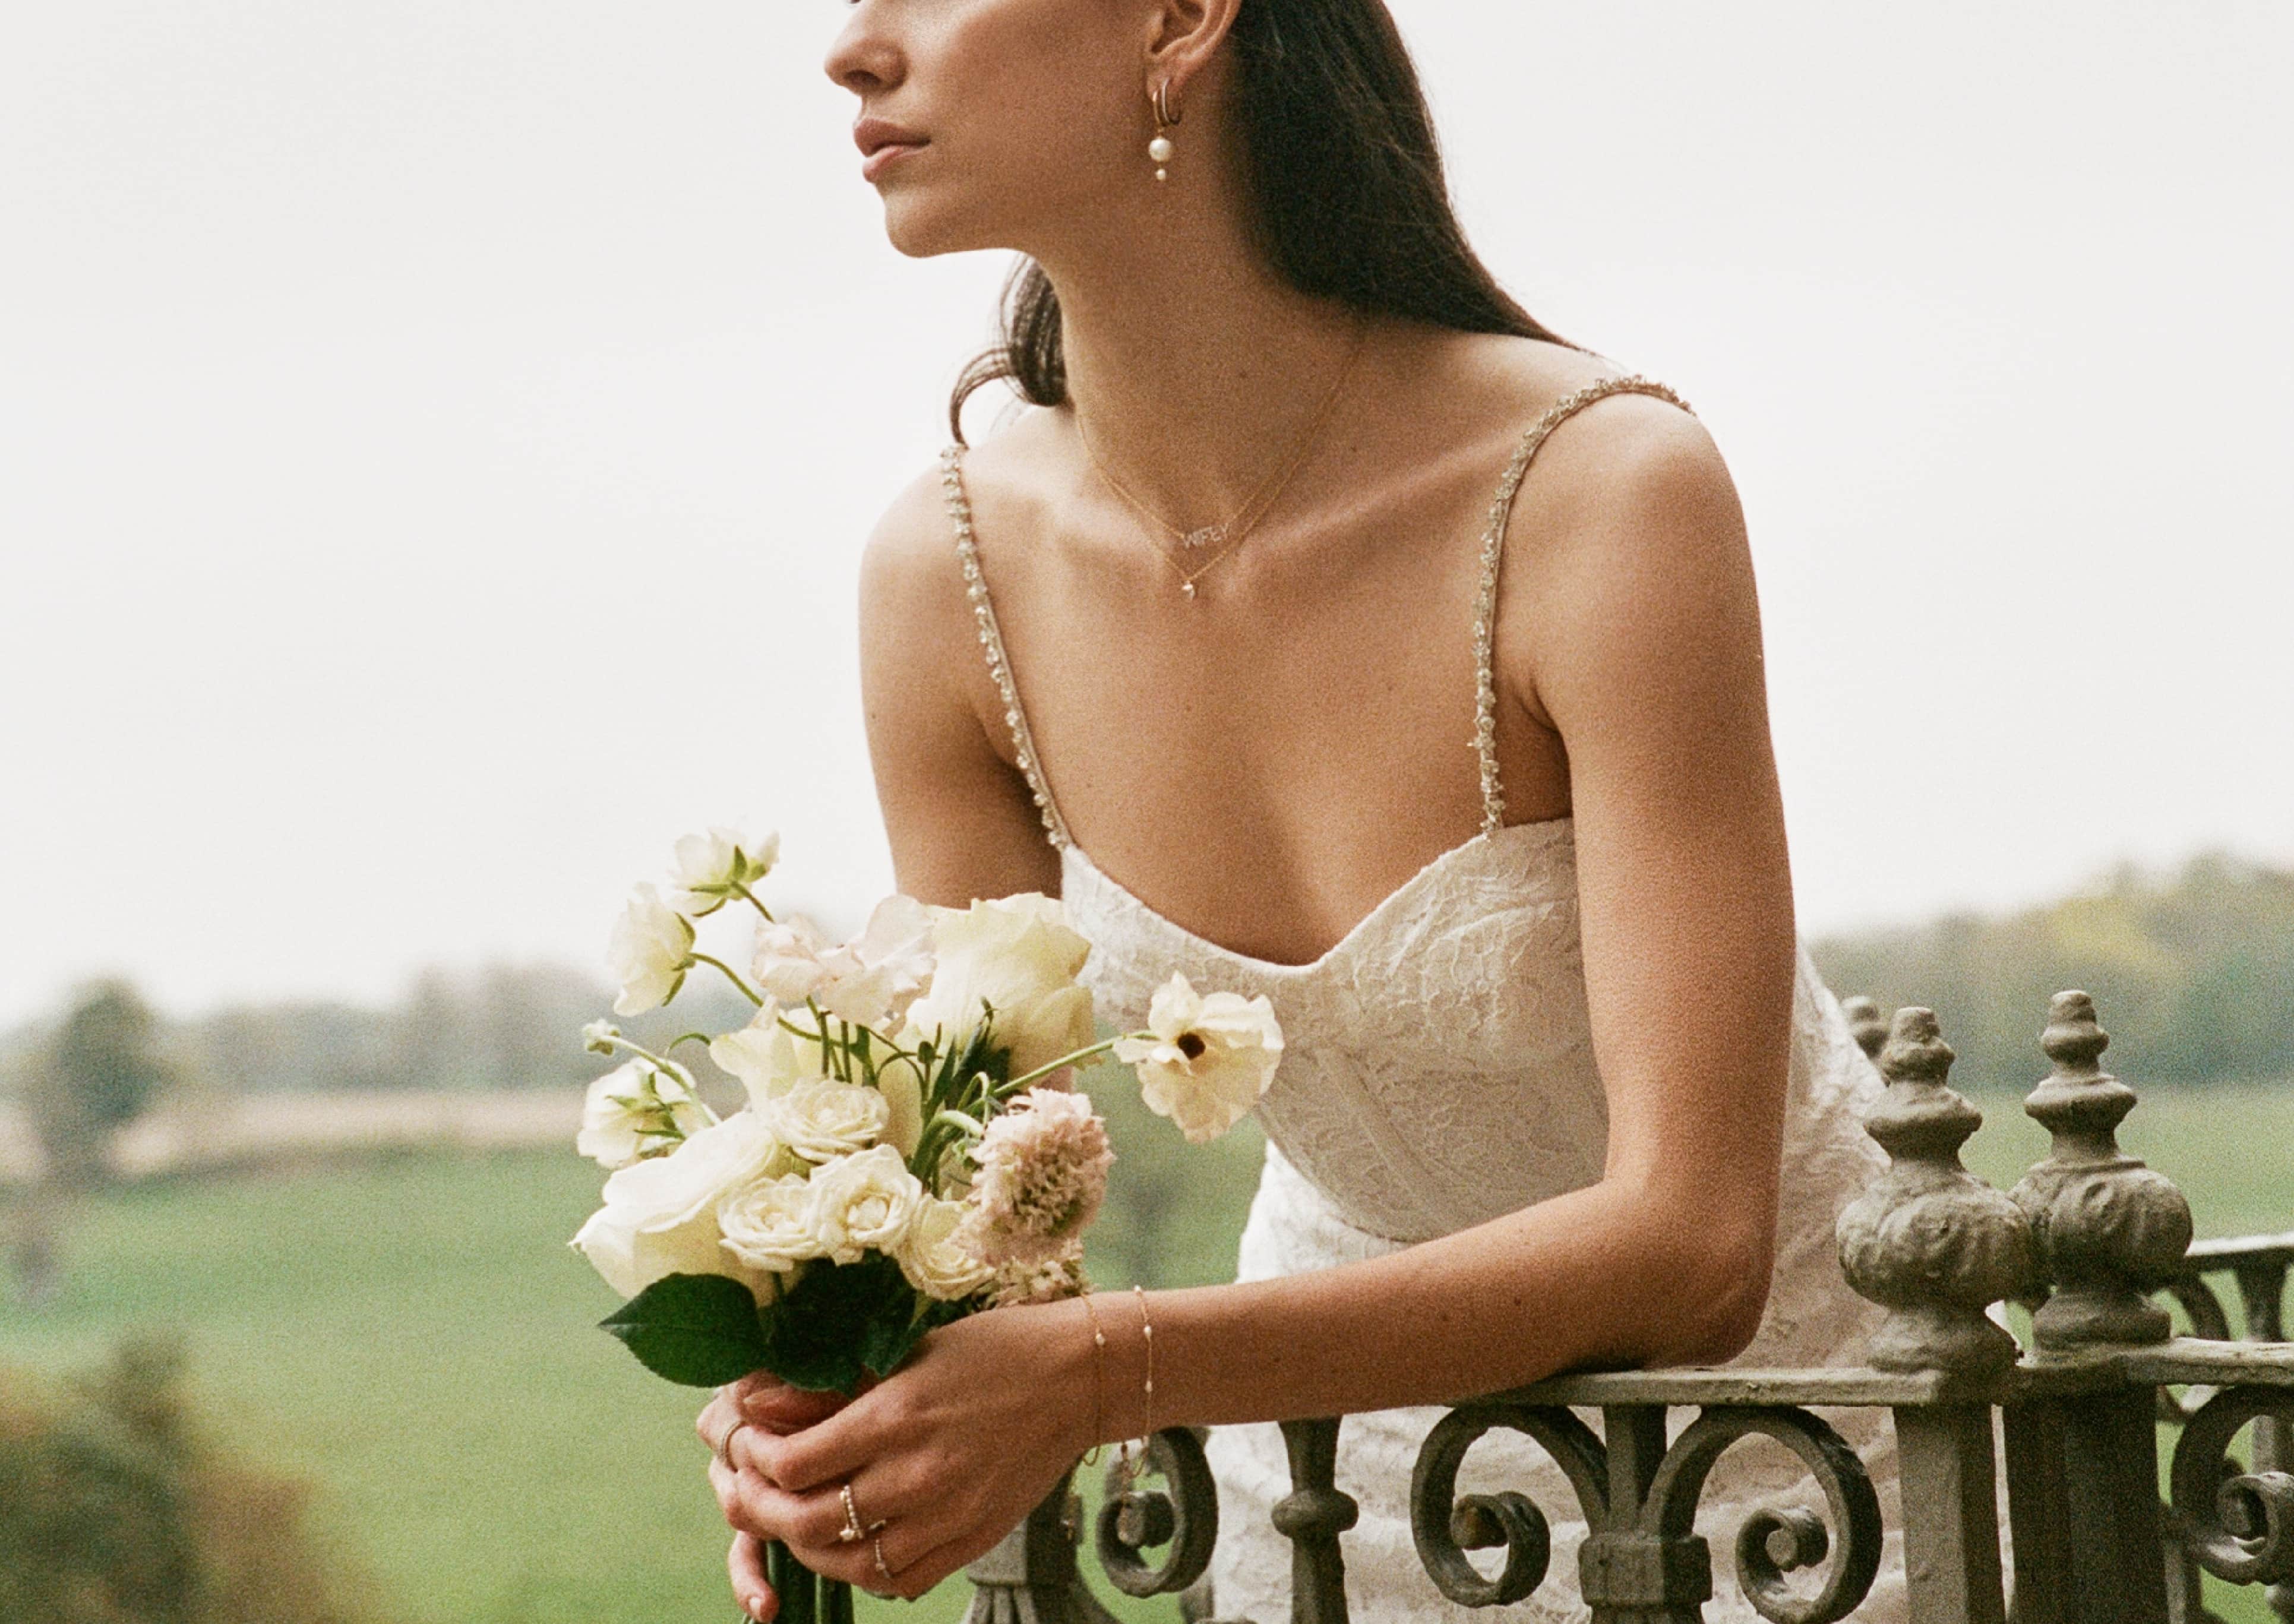 Wedding jewelry—find special jewelry for the bride